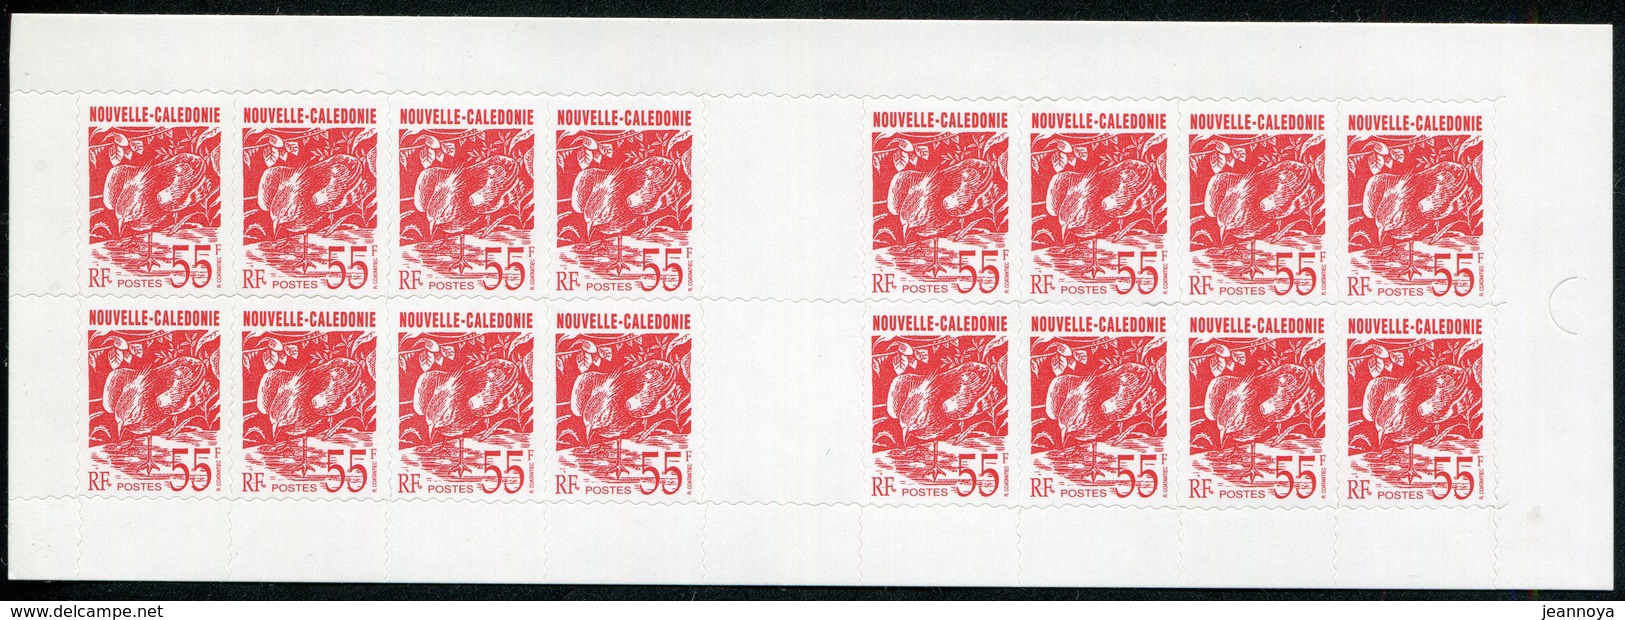 NOUVELLE CALEDONIE - CARNET N° C639 * * - TYPE CAGOU - LUXE - Cuadernillos